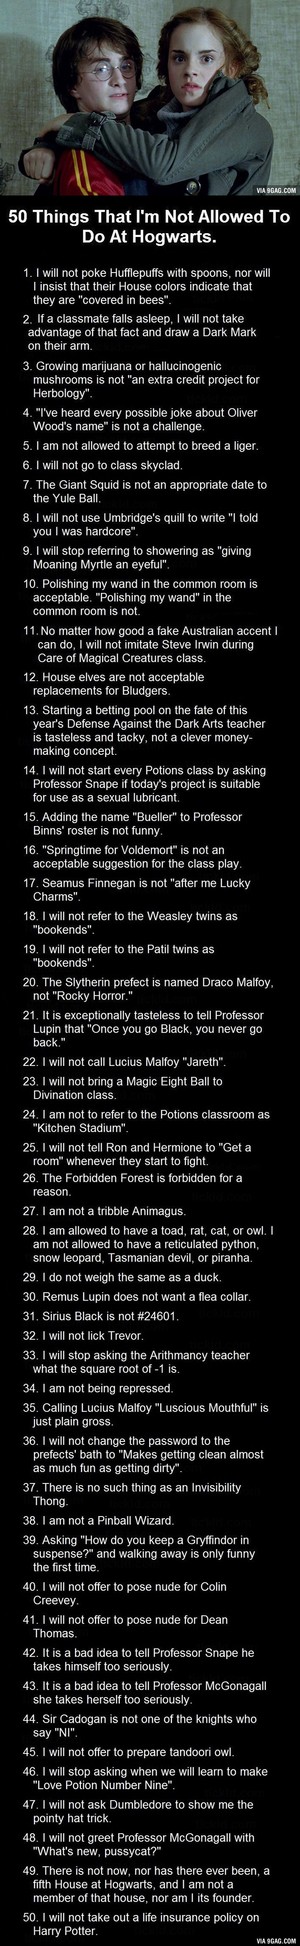  50 Things I'm Not Allowed To Do At Hogwarts